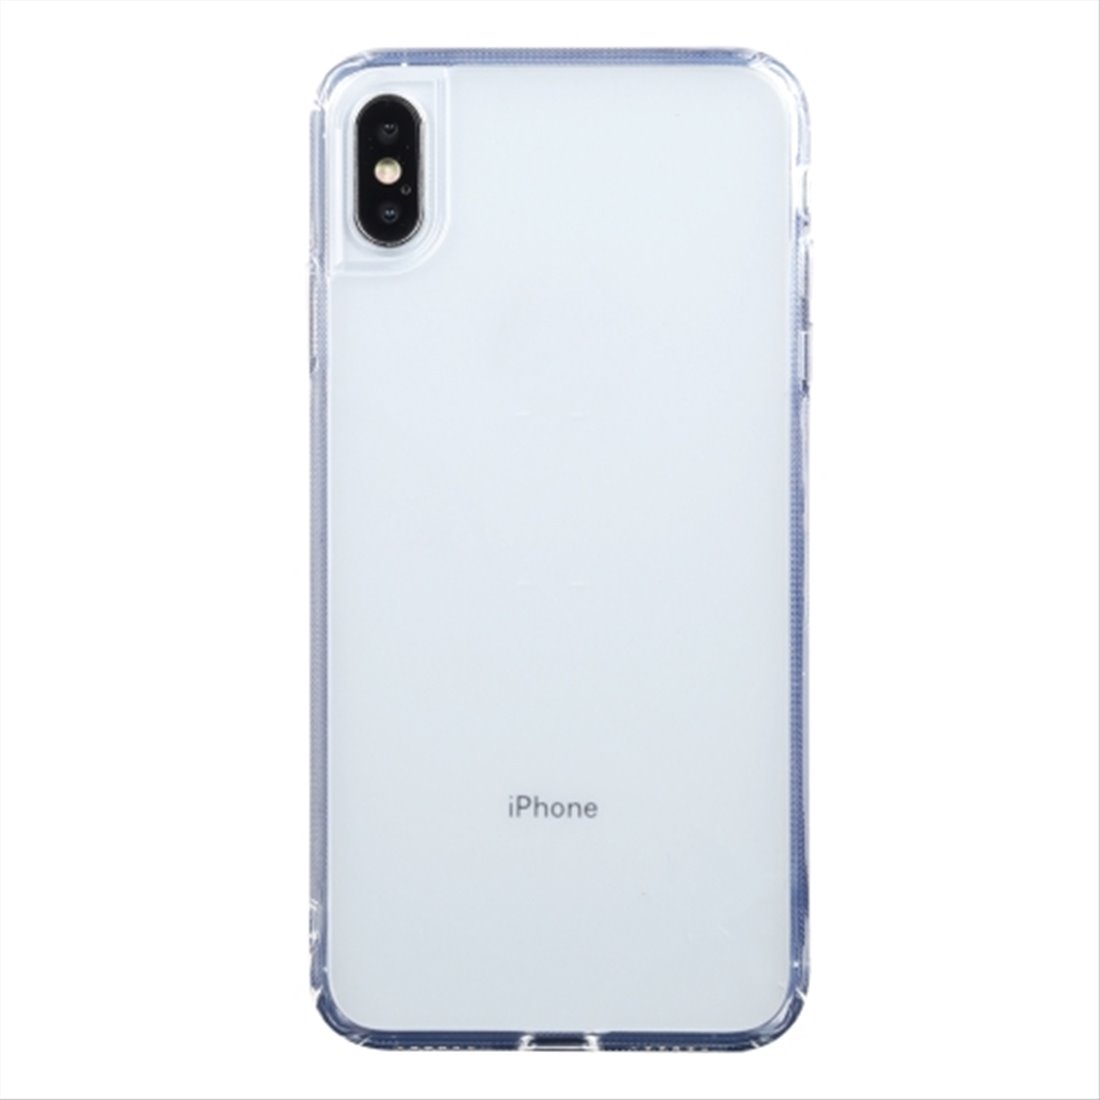 Apple iPhone X/XS silicone Transparent Back Cover Smartphone Case